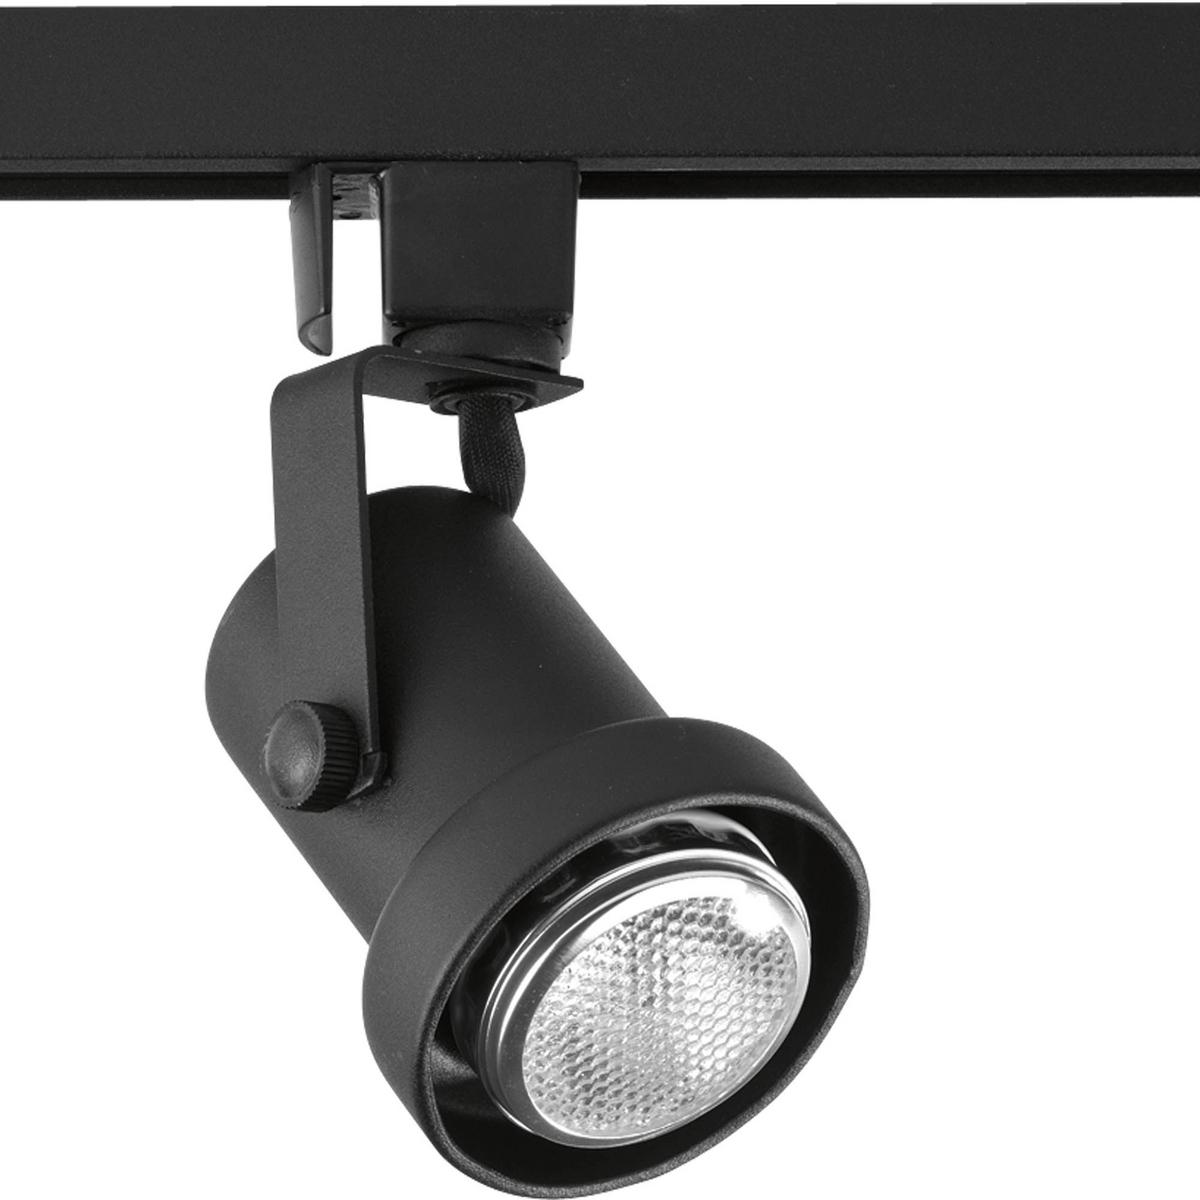 Hubbell P6325-31 Black high tech Alpha Trak track head with 360 degree horizontal rotation and 90 degree vertical rotation. Heads can be easily repositioned on the track to provide lighting in different areas of the room. Excellent for both residential and retail location